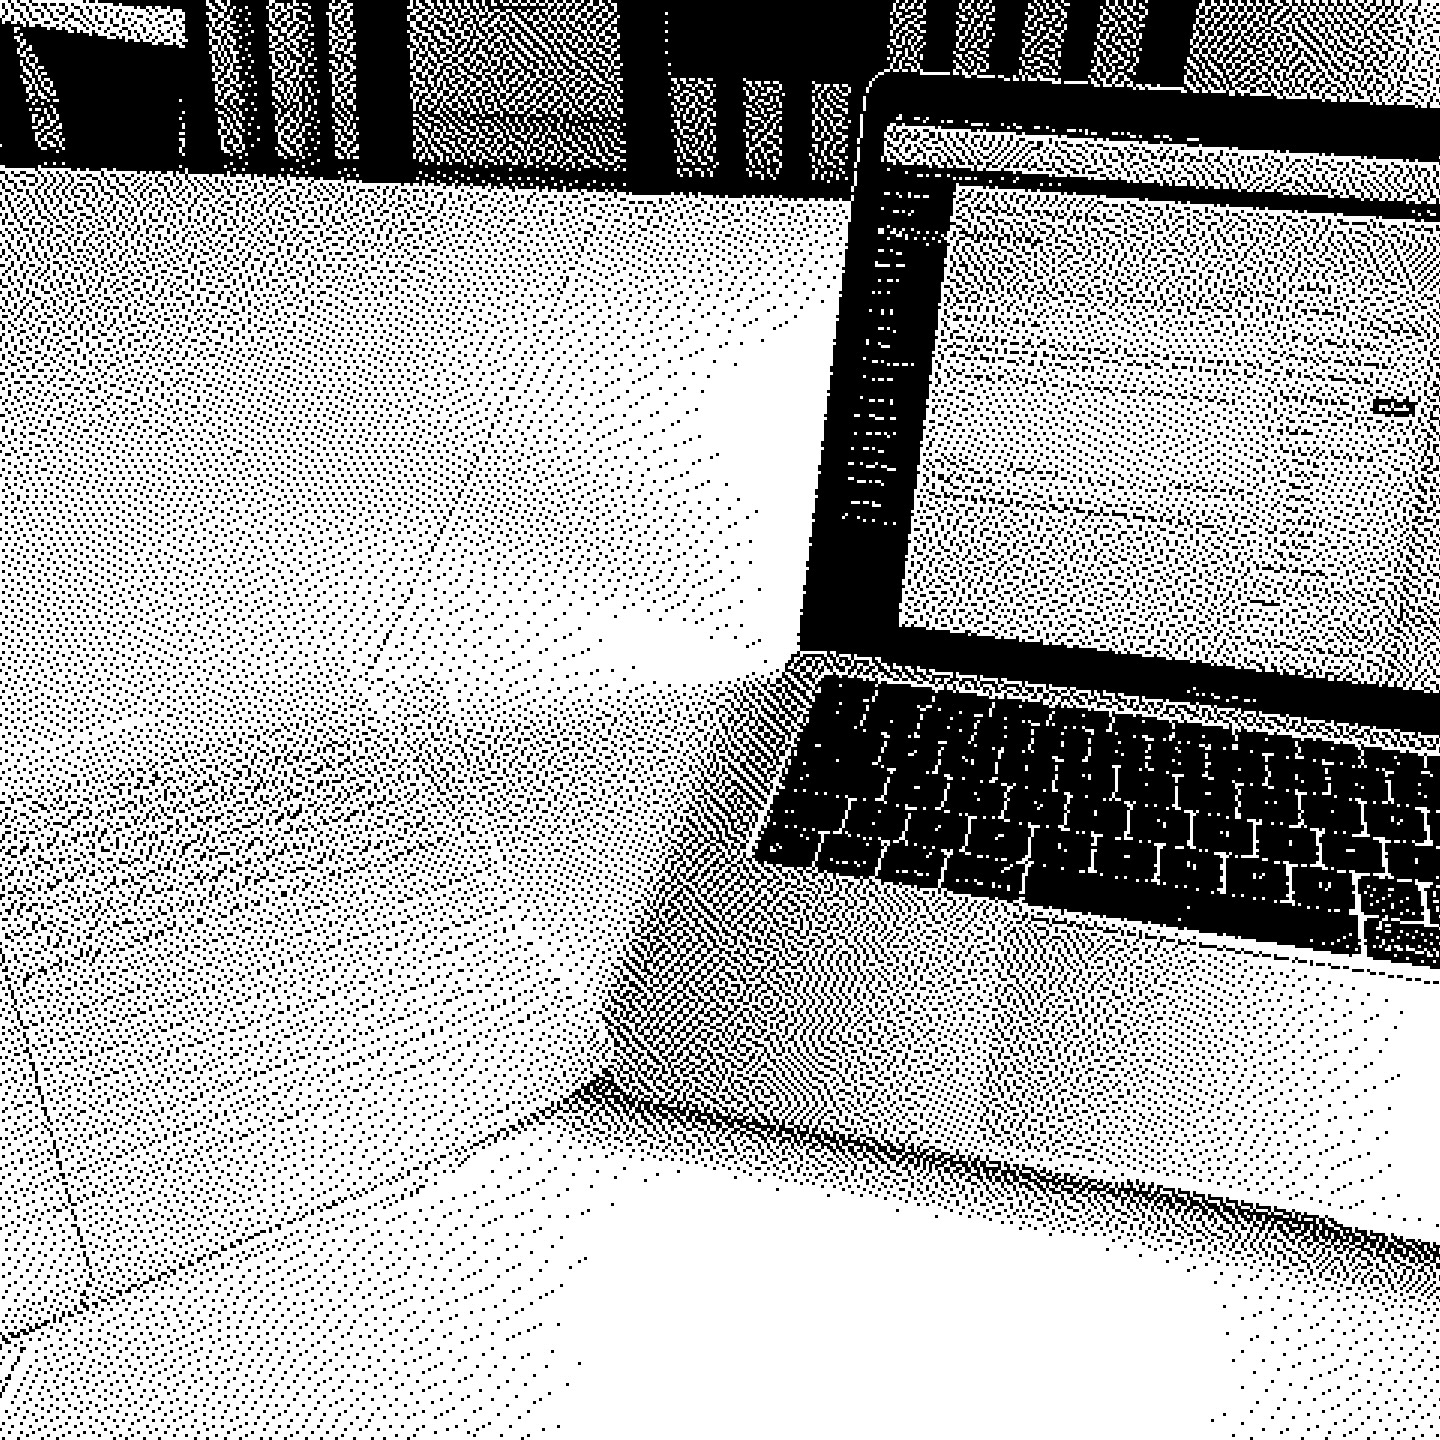 A pixelated photo of my notebook and laptop